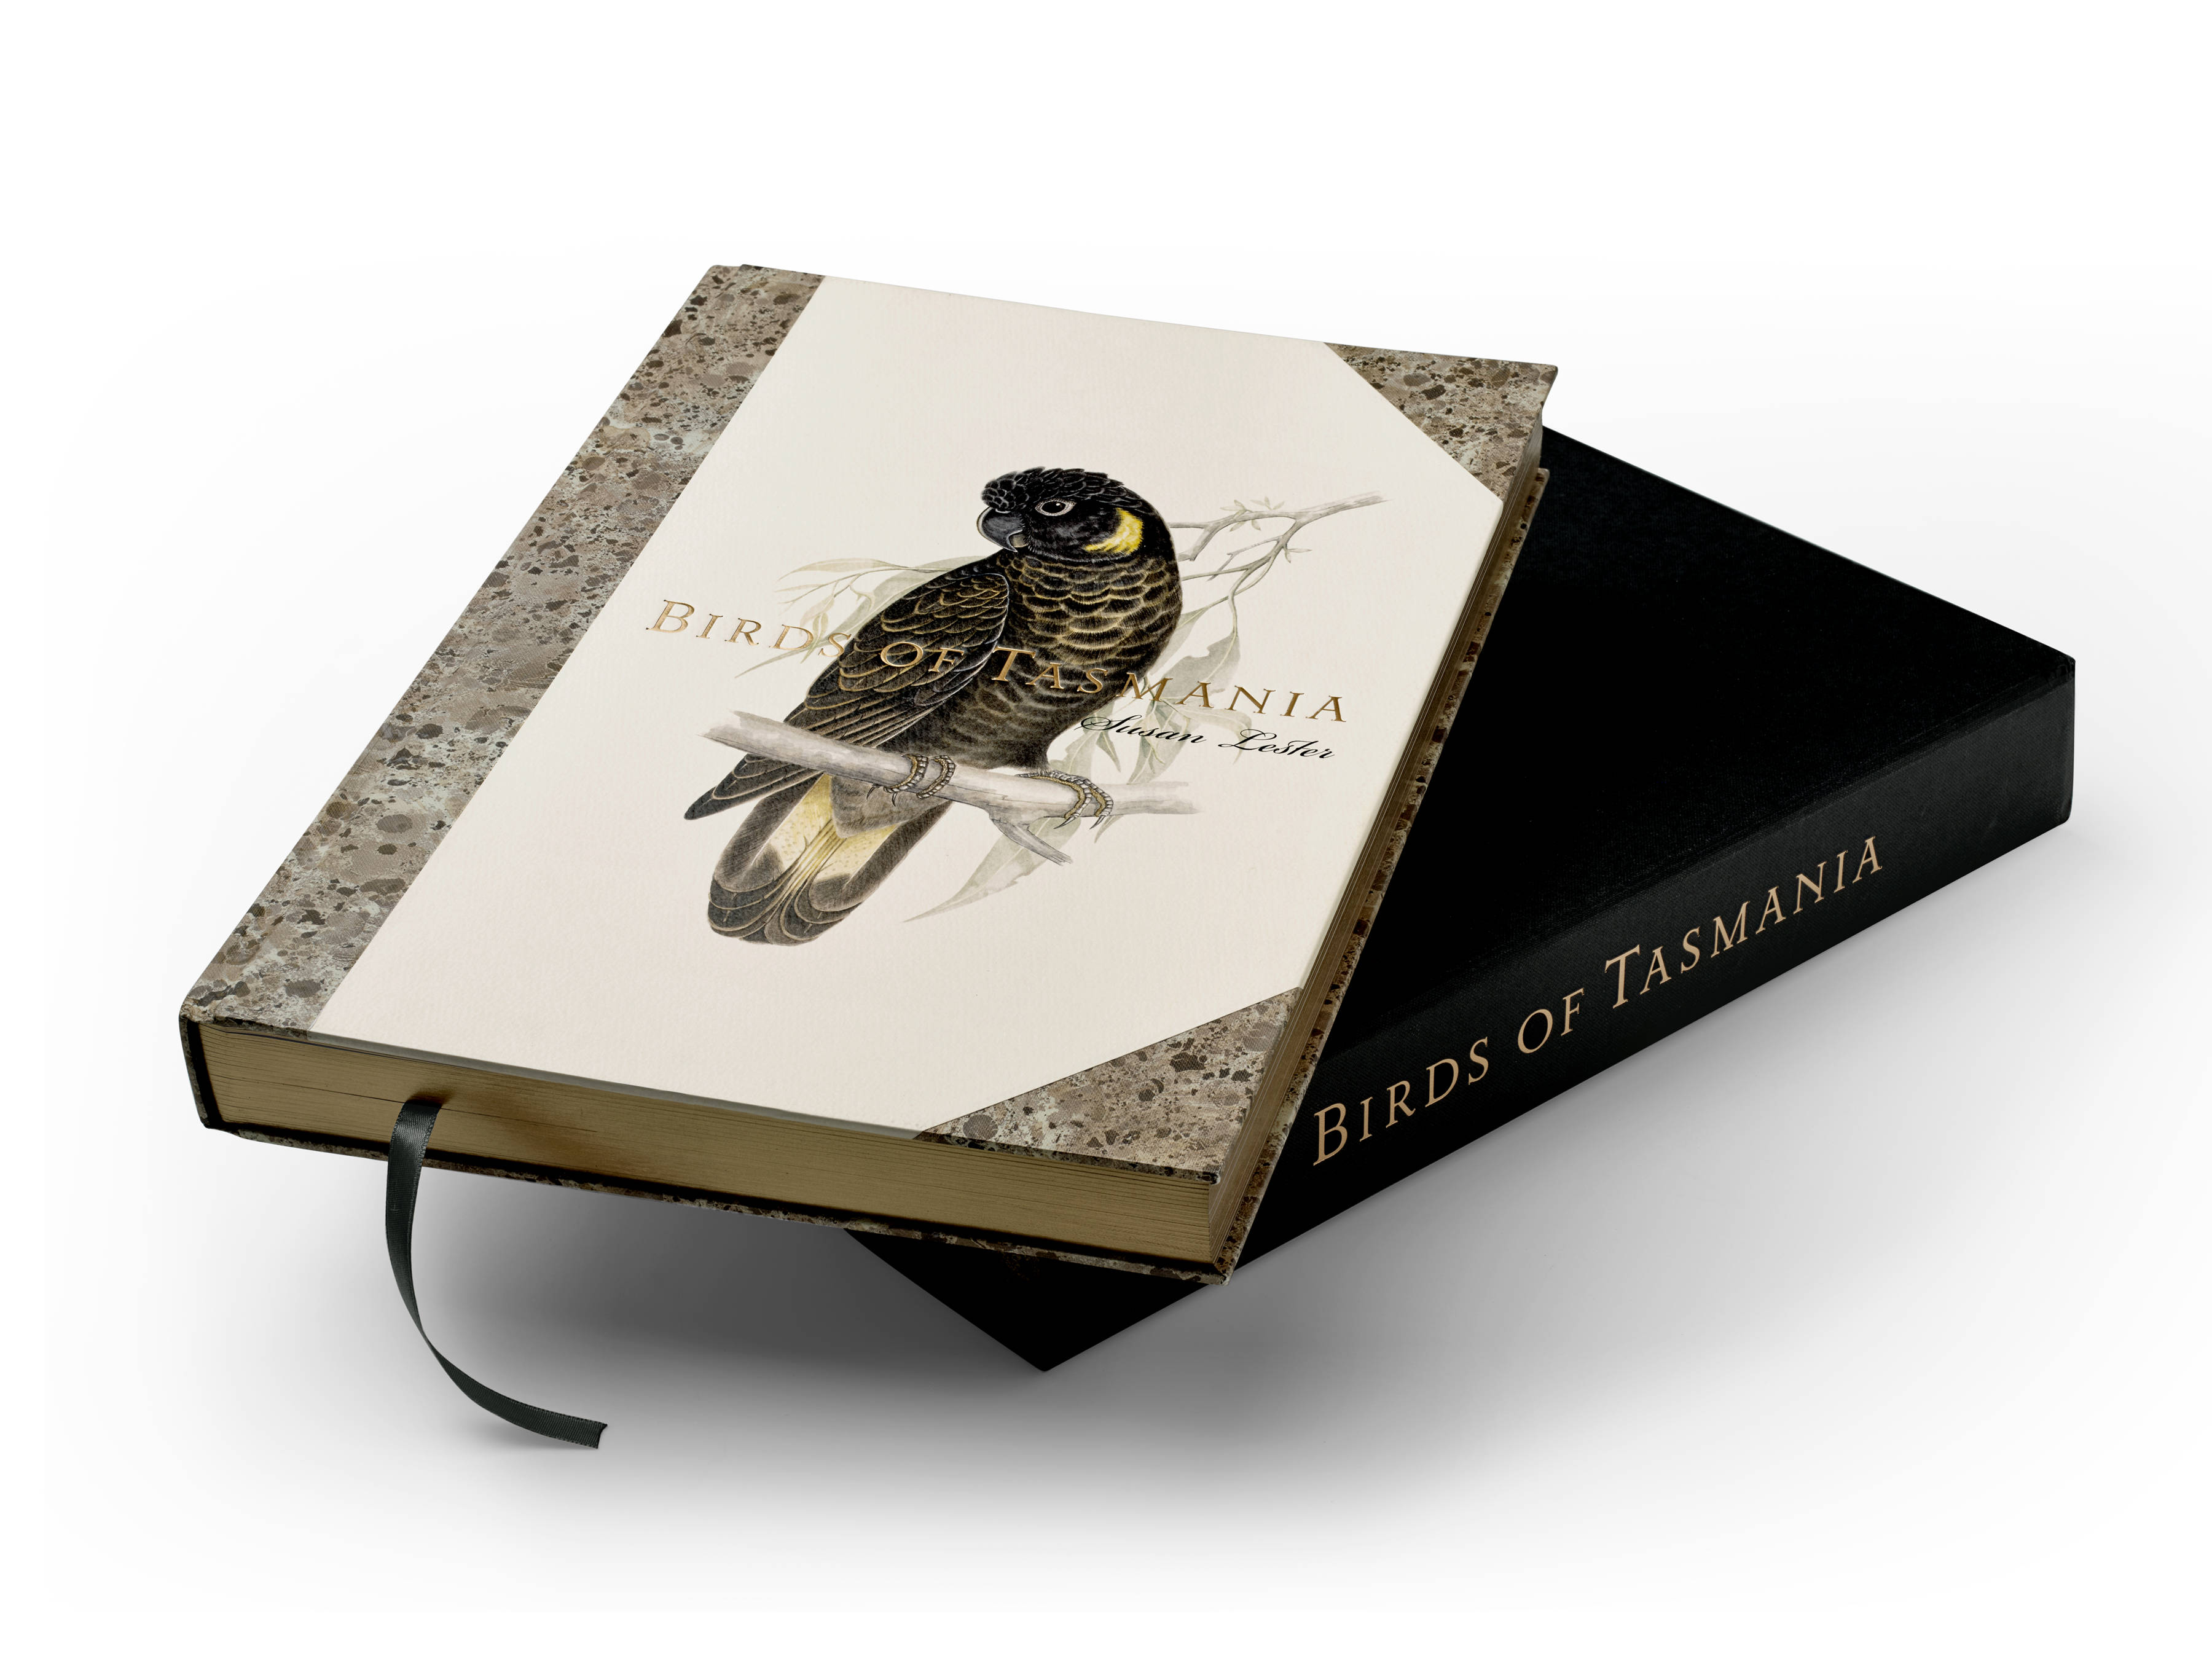 The Birds of Tasmania by Susan Lester book, with a Yellow-tailed Cockatoo ‘Zanda funerea’ and gold and black foil titling, sitting on the black clamshell presentation box.